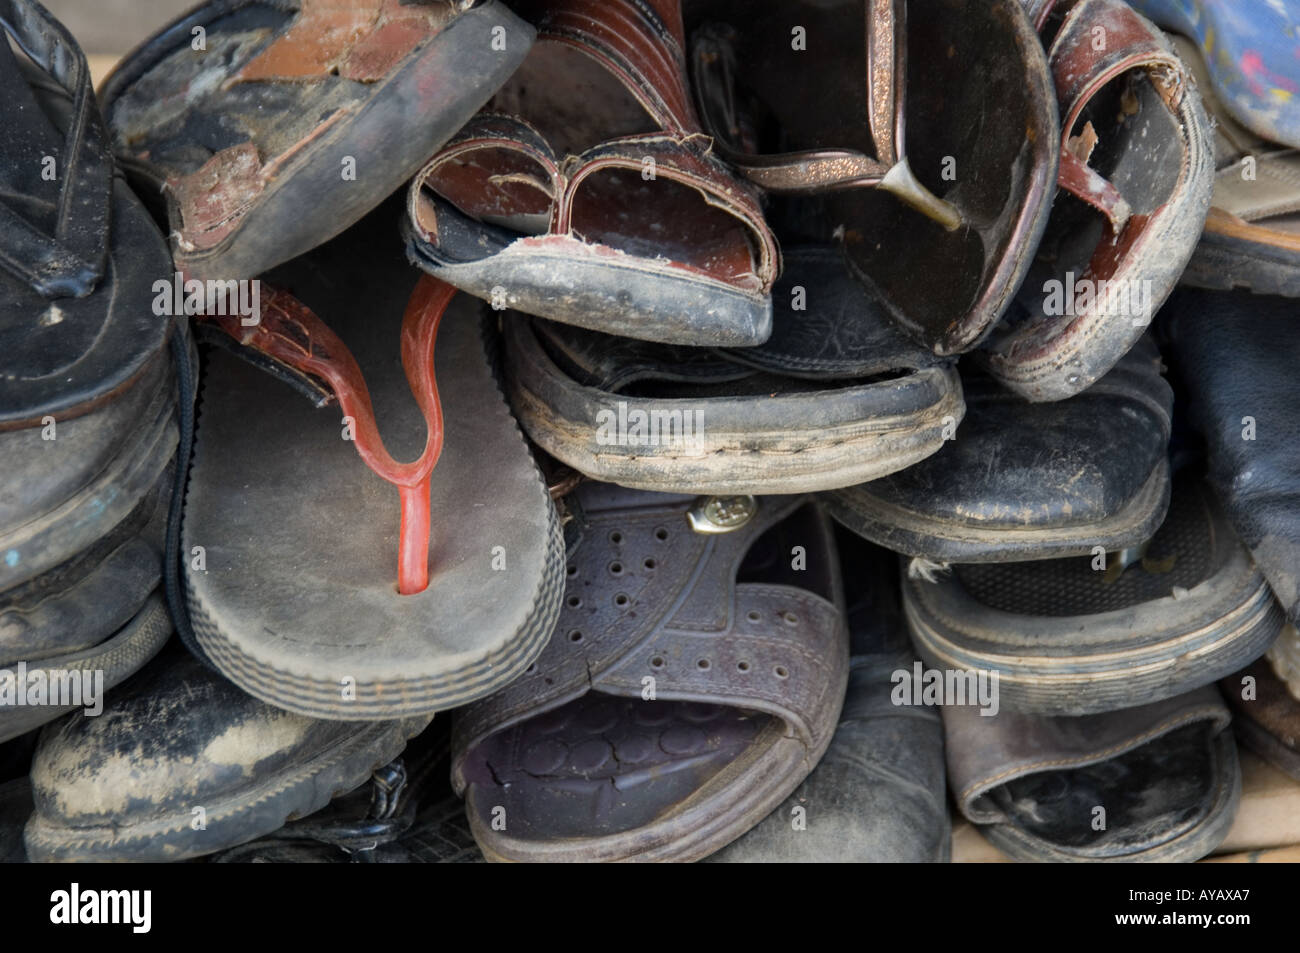 Dirty Shoes For Sale | peacecommission.kdsg.gov.ng